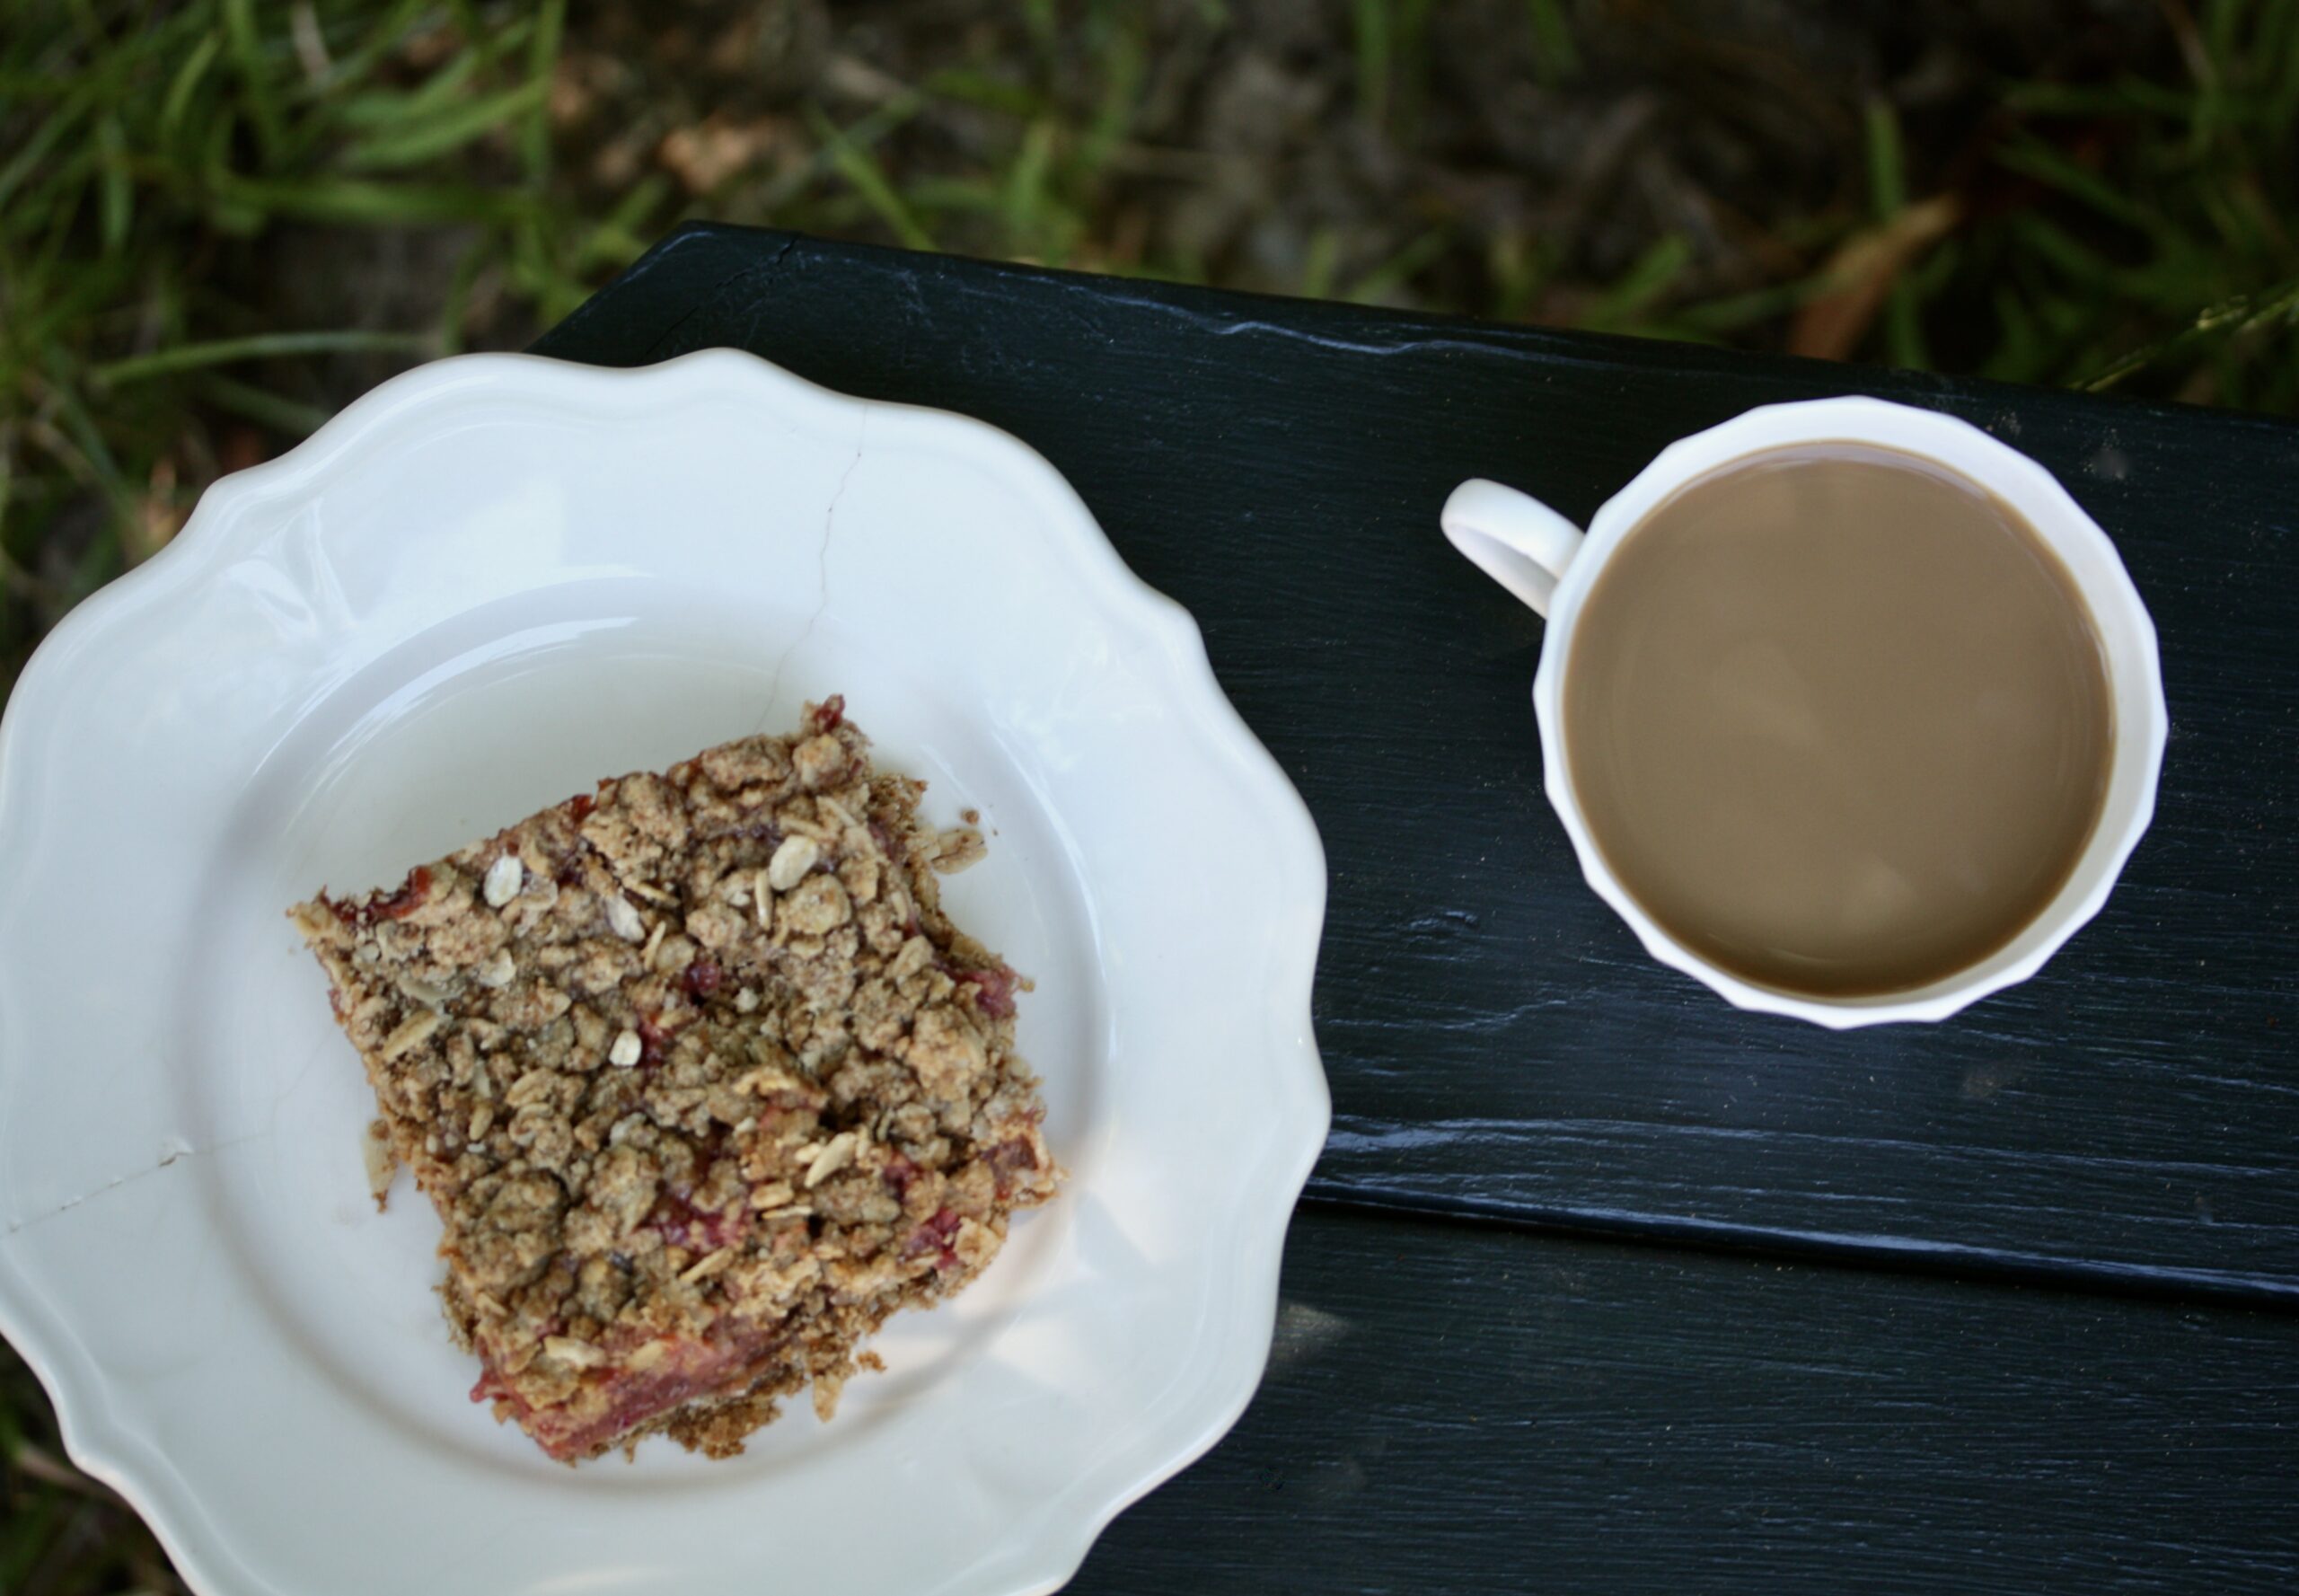 A strawberry rhubarb bar on a plate next to a cup of coffee.